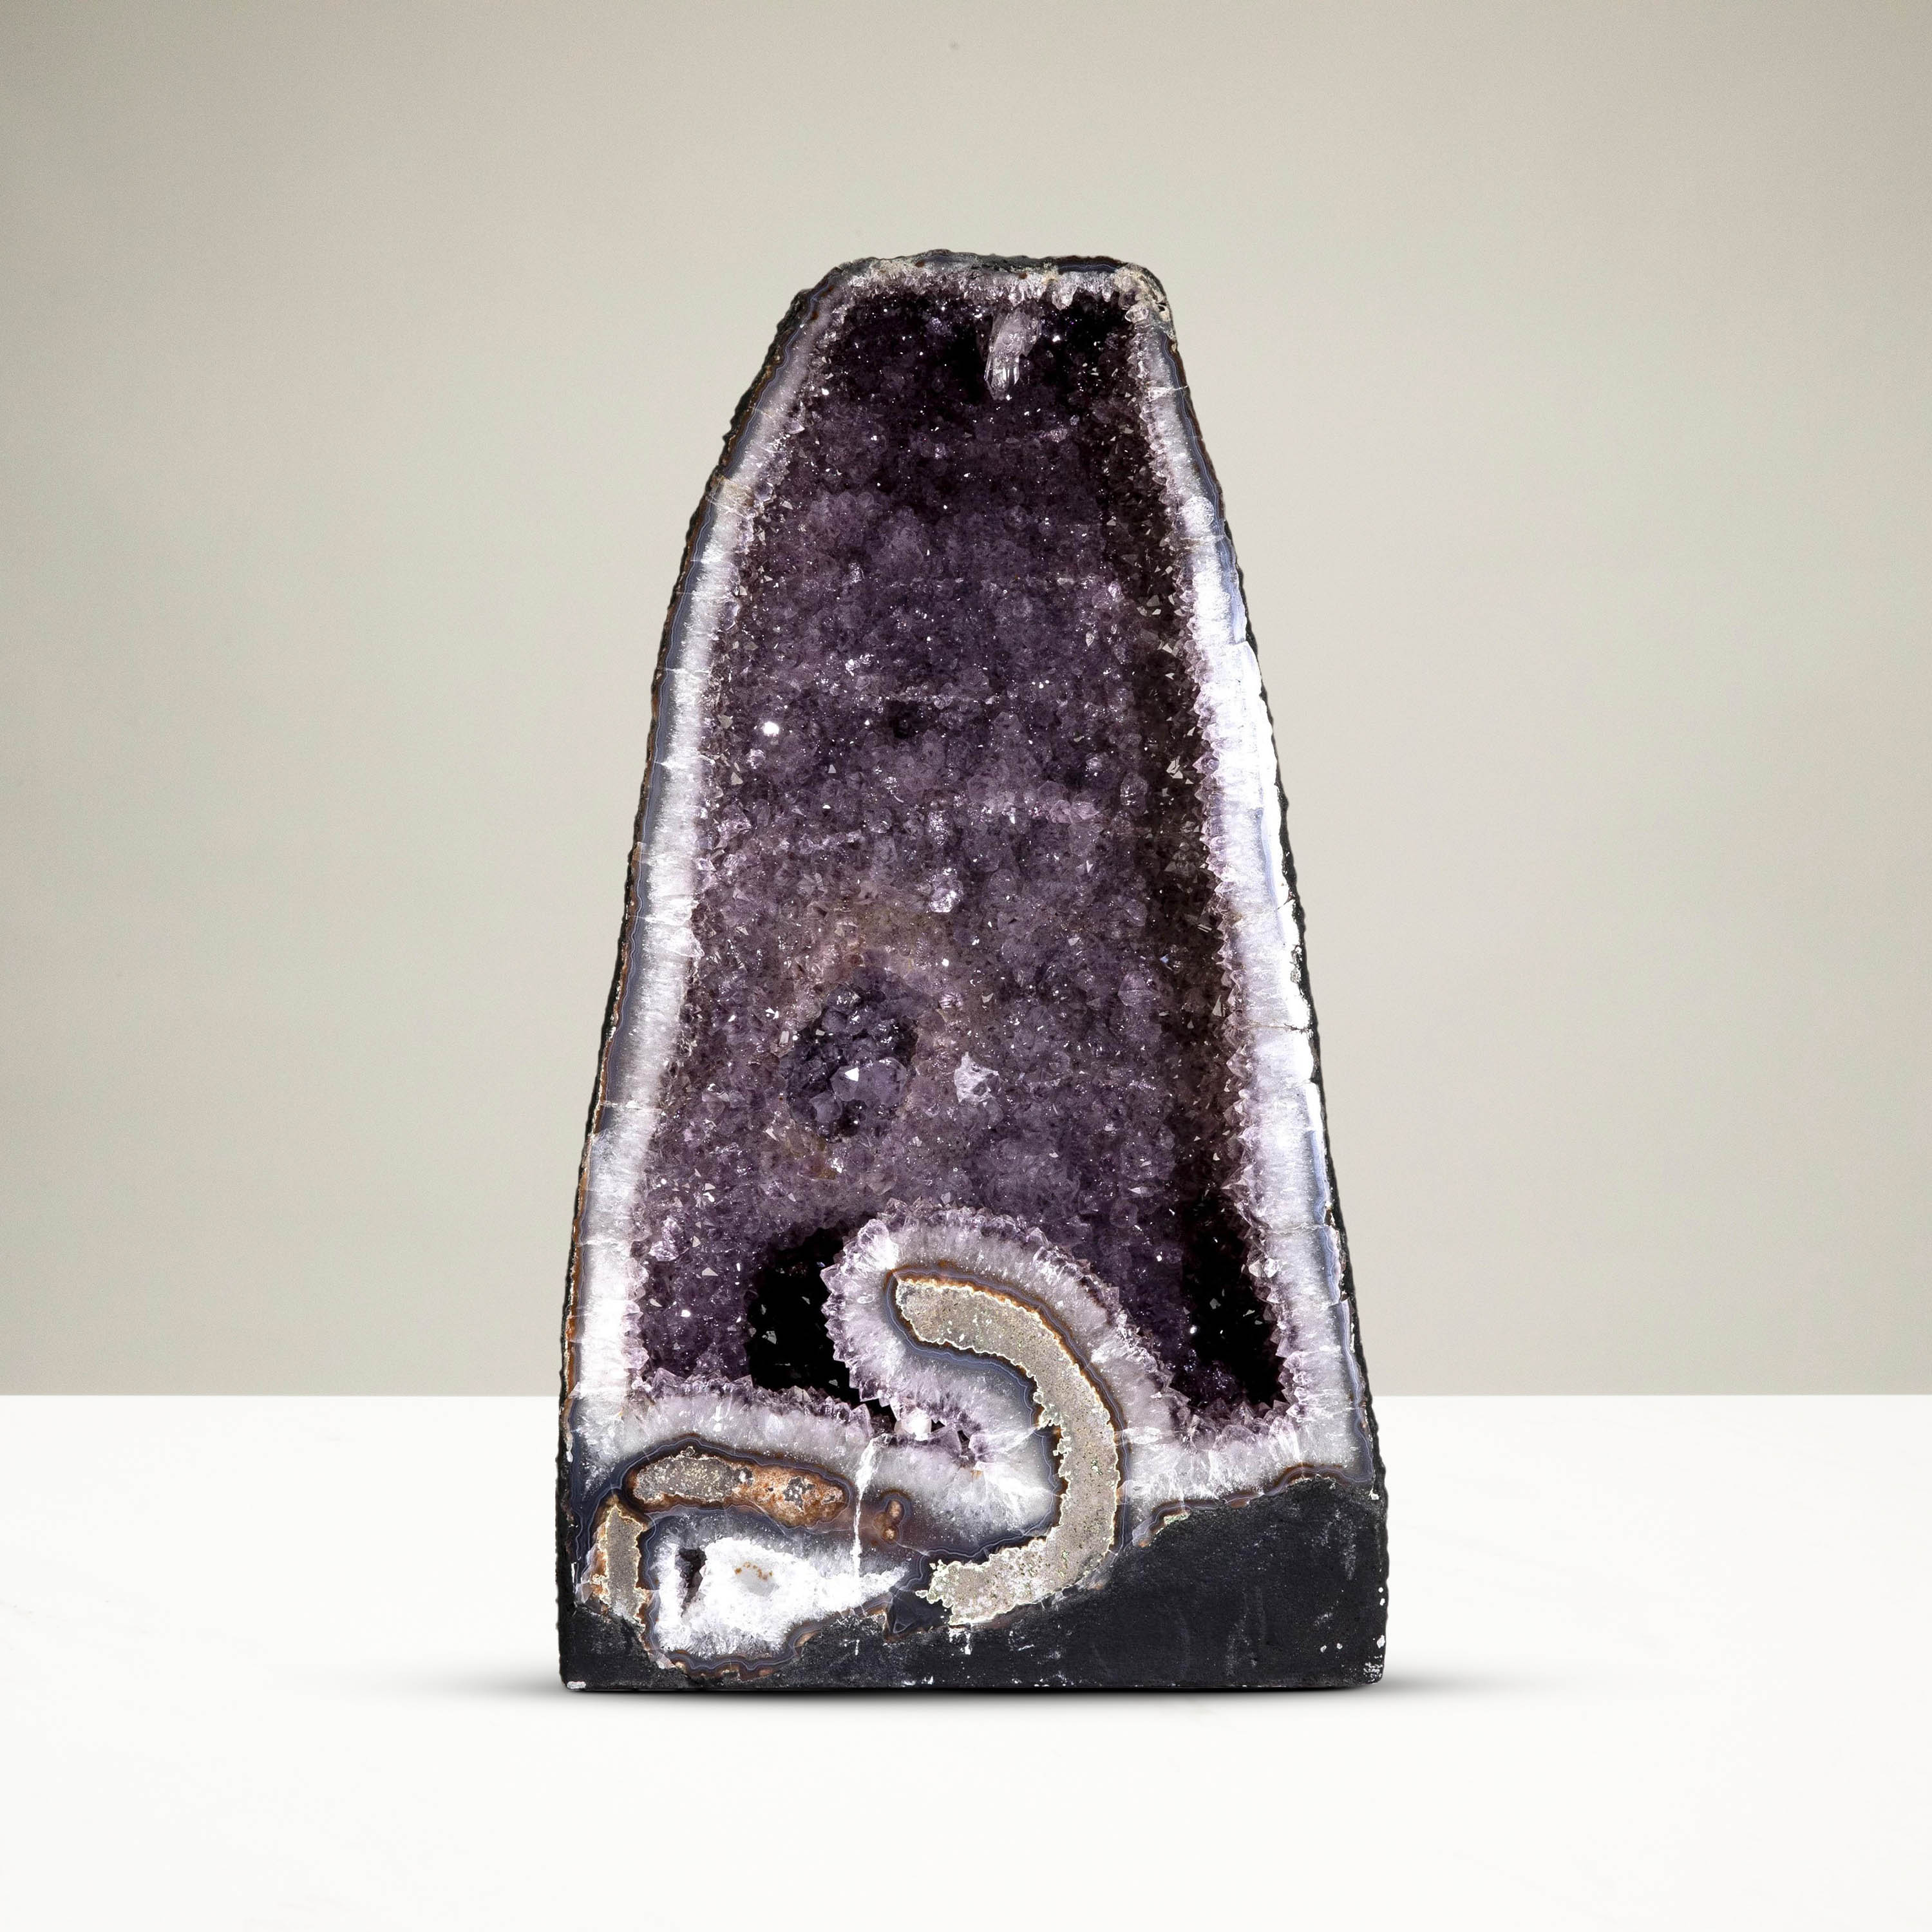 Kalifano Amethyst Natural Brazilian Amethyst Crystal Geode Cathedral - 20 in / 71 lbs BAG6200.001